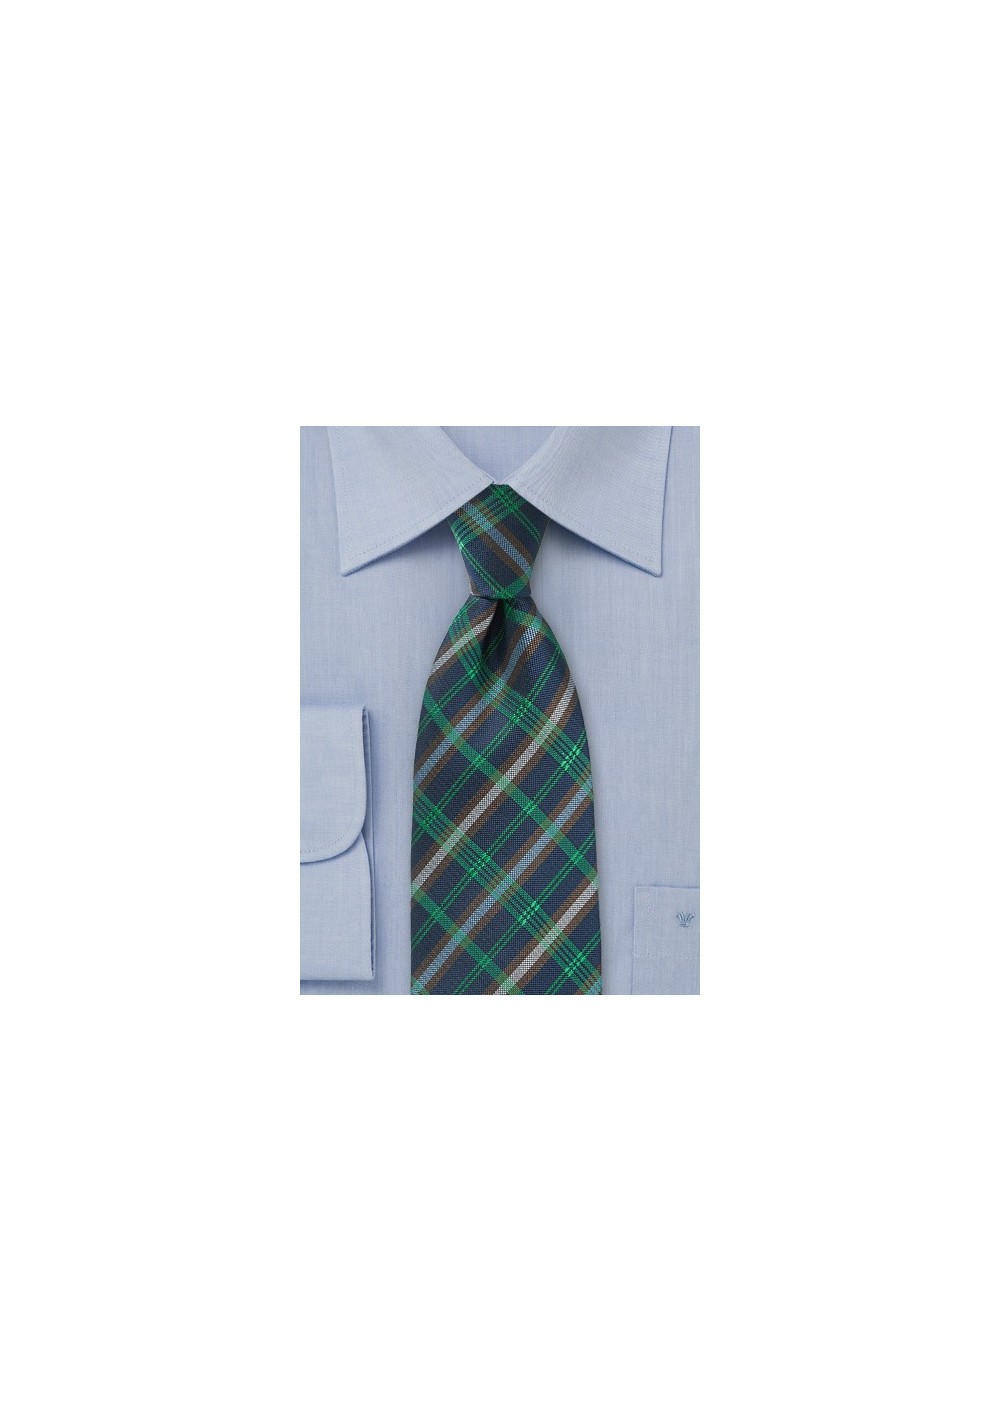 Modern Plaid Tie in Navy and Greens